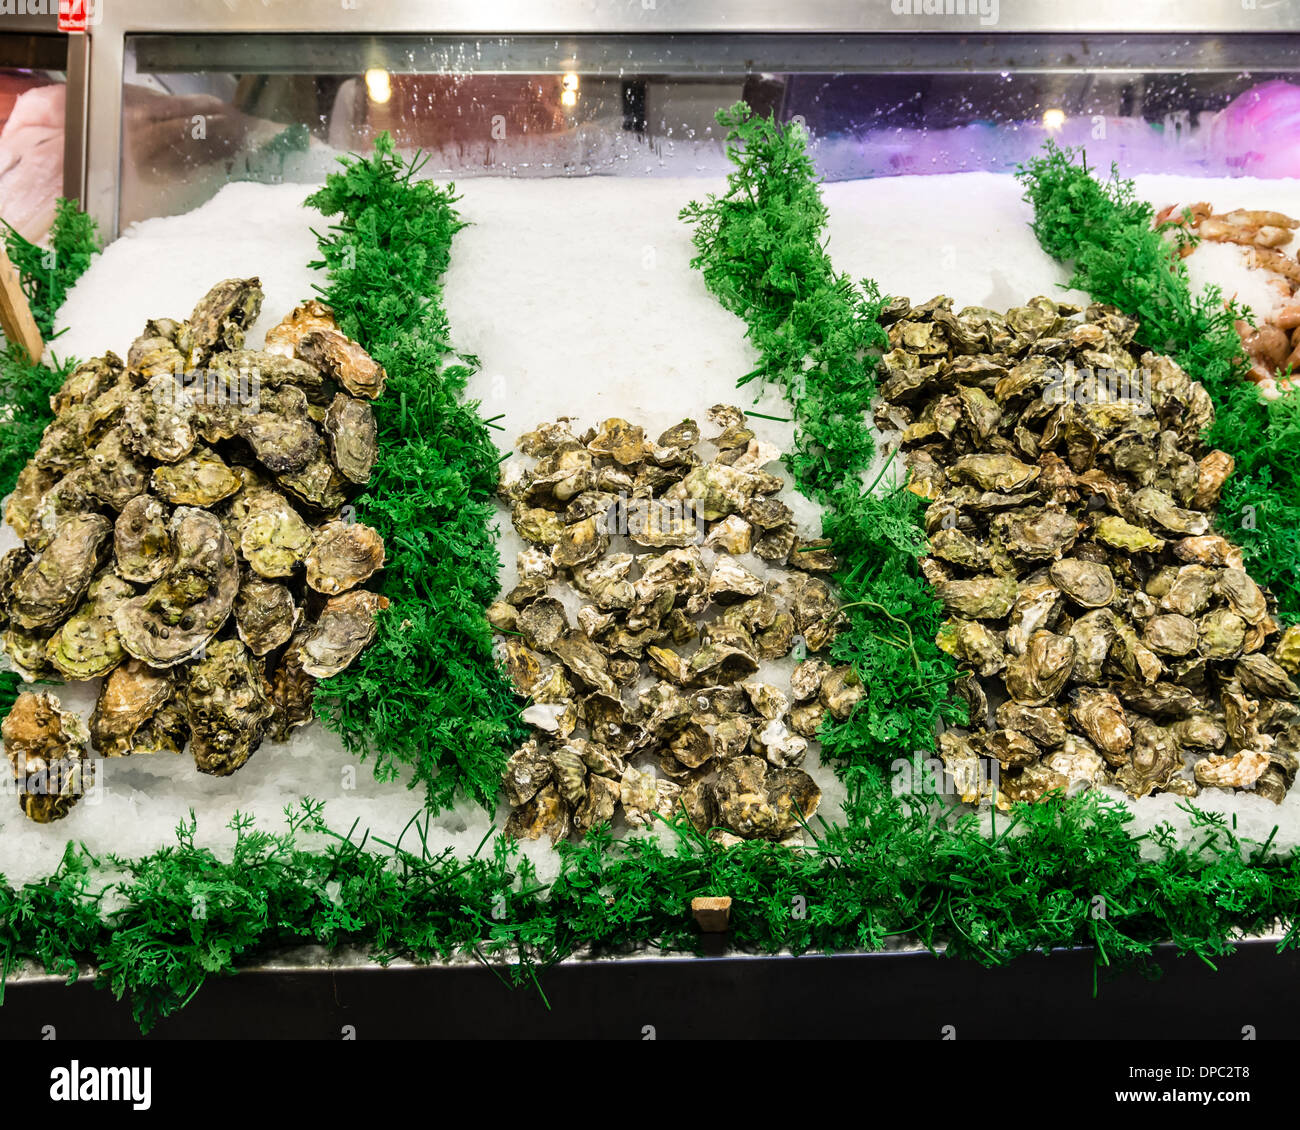 Display of fresh oysters on ice in a refrigerated case at a market stall Pike Place Market Seattle, Washington, USA Stock Photo